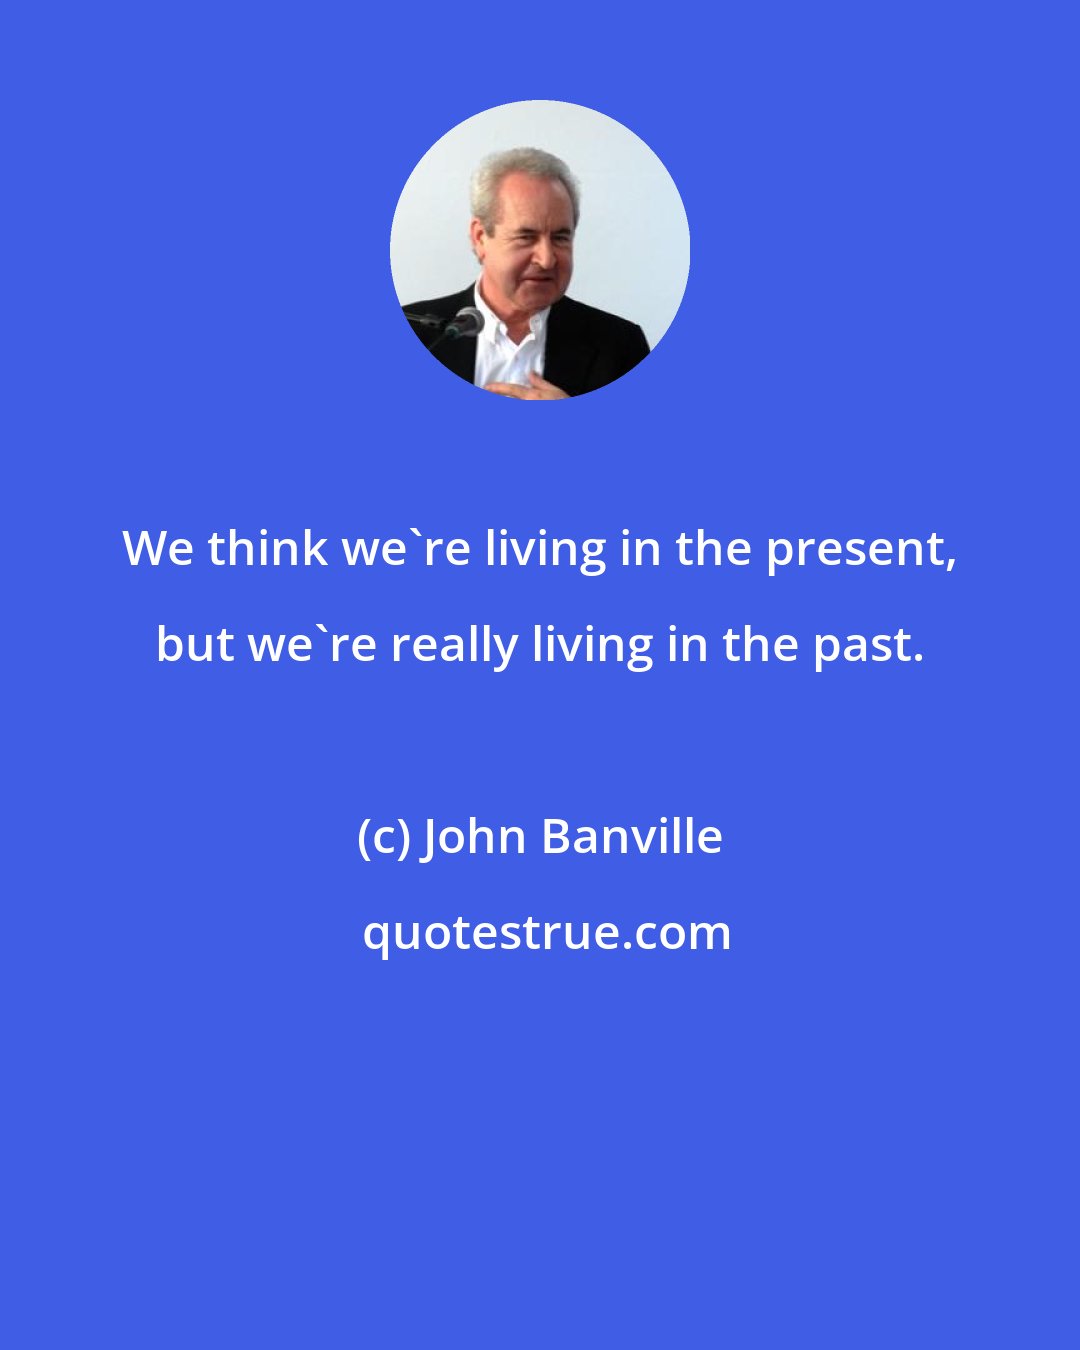 John Banville: We think we're living in the present, but we're really living in the past.